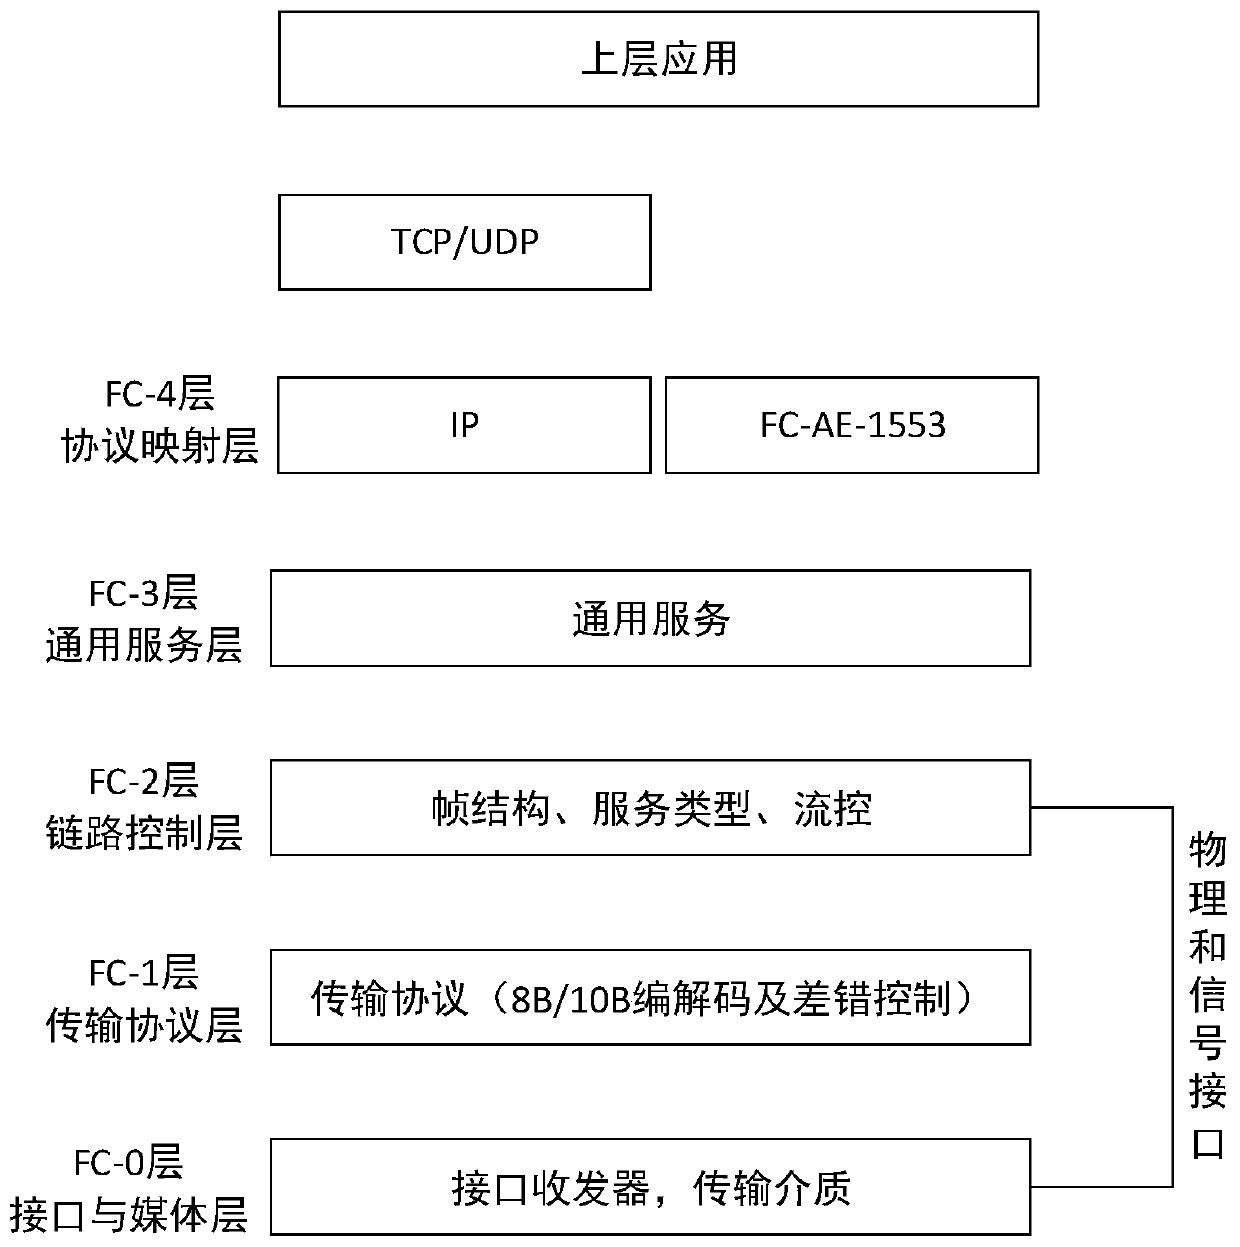 Multi-protocol fusion system, ip communication between nodes and fc-ae-1553 communication method